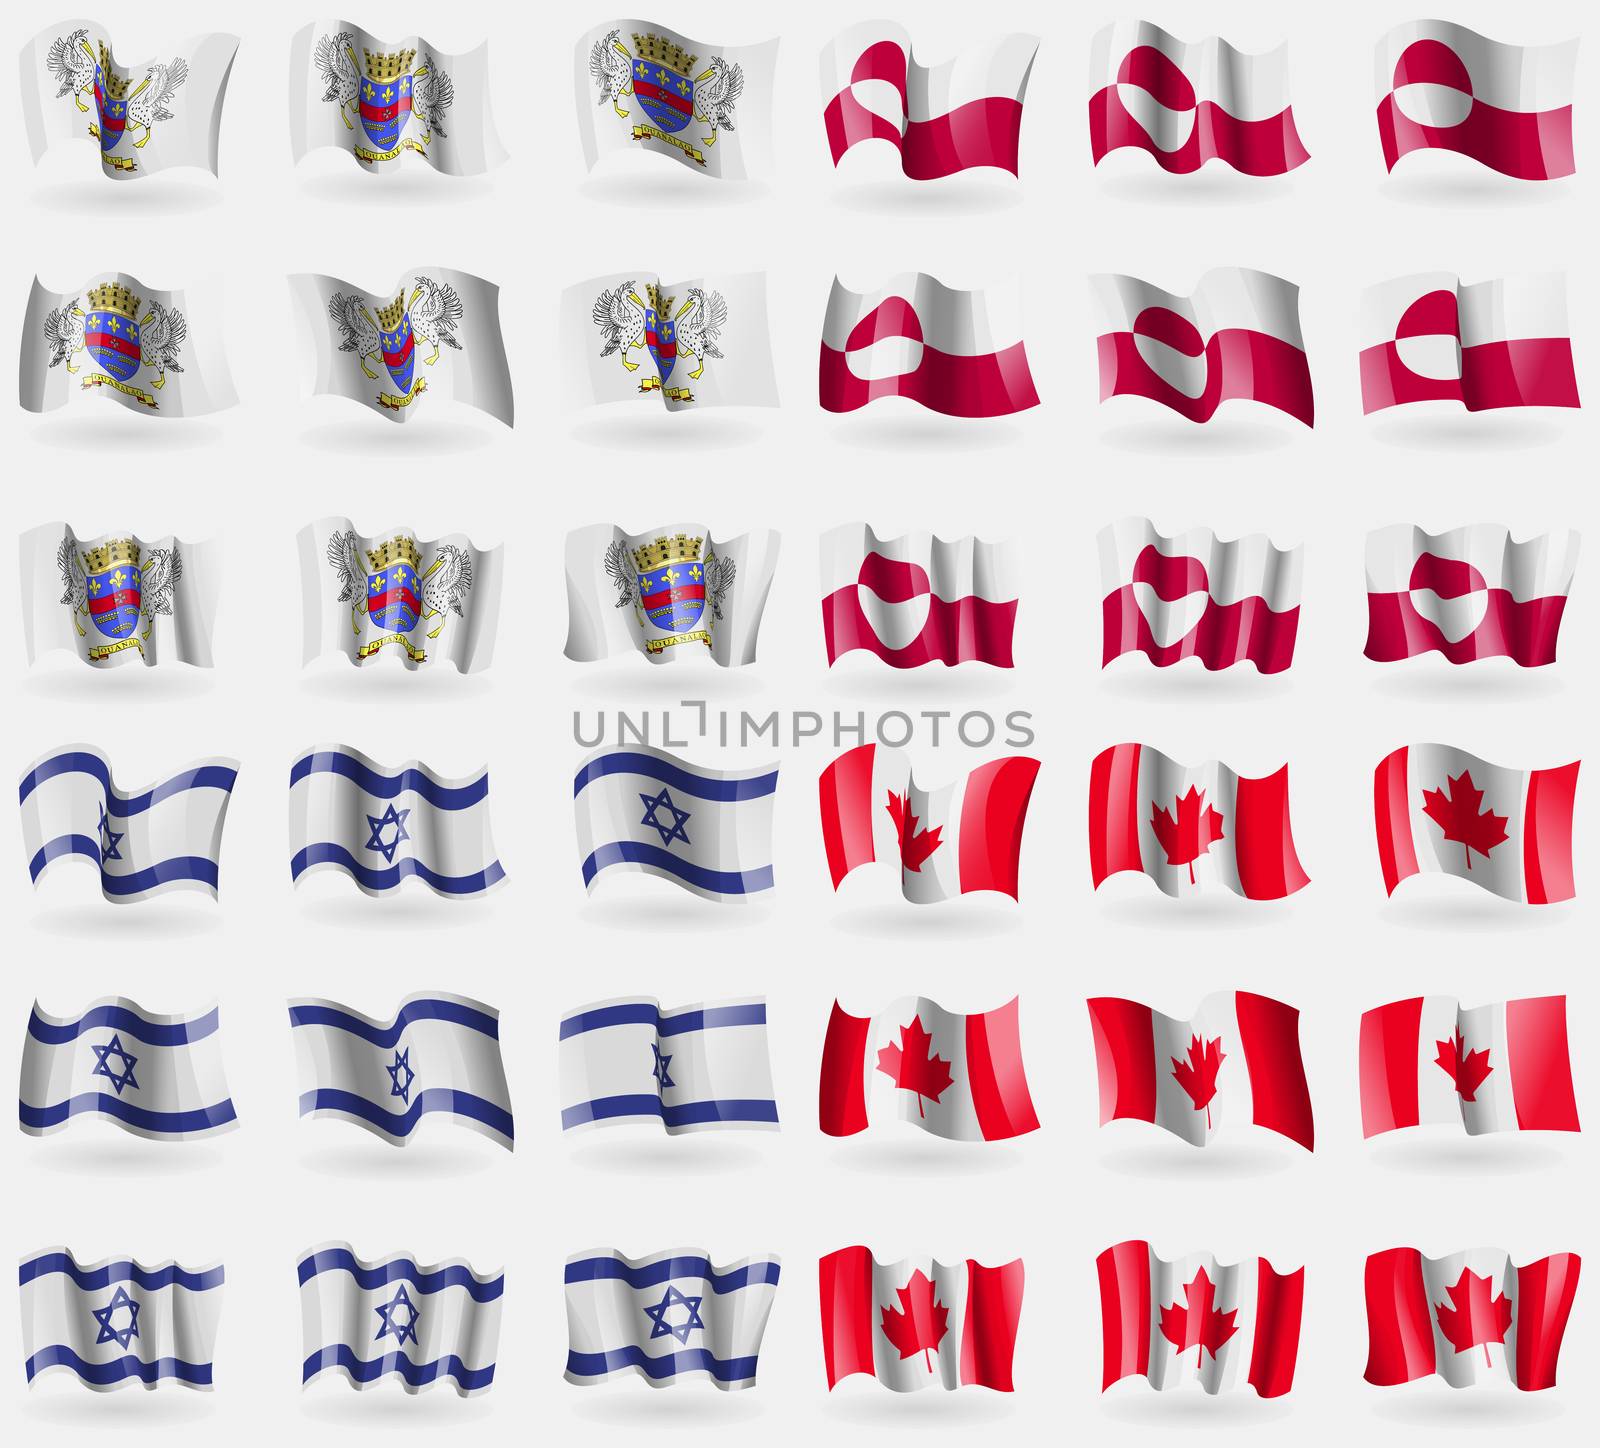 Saint Barthelemy, Greenland, Israel, Canada. Set of 36 flags of the countries of the world. illustration